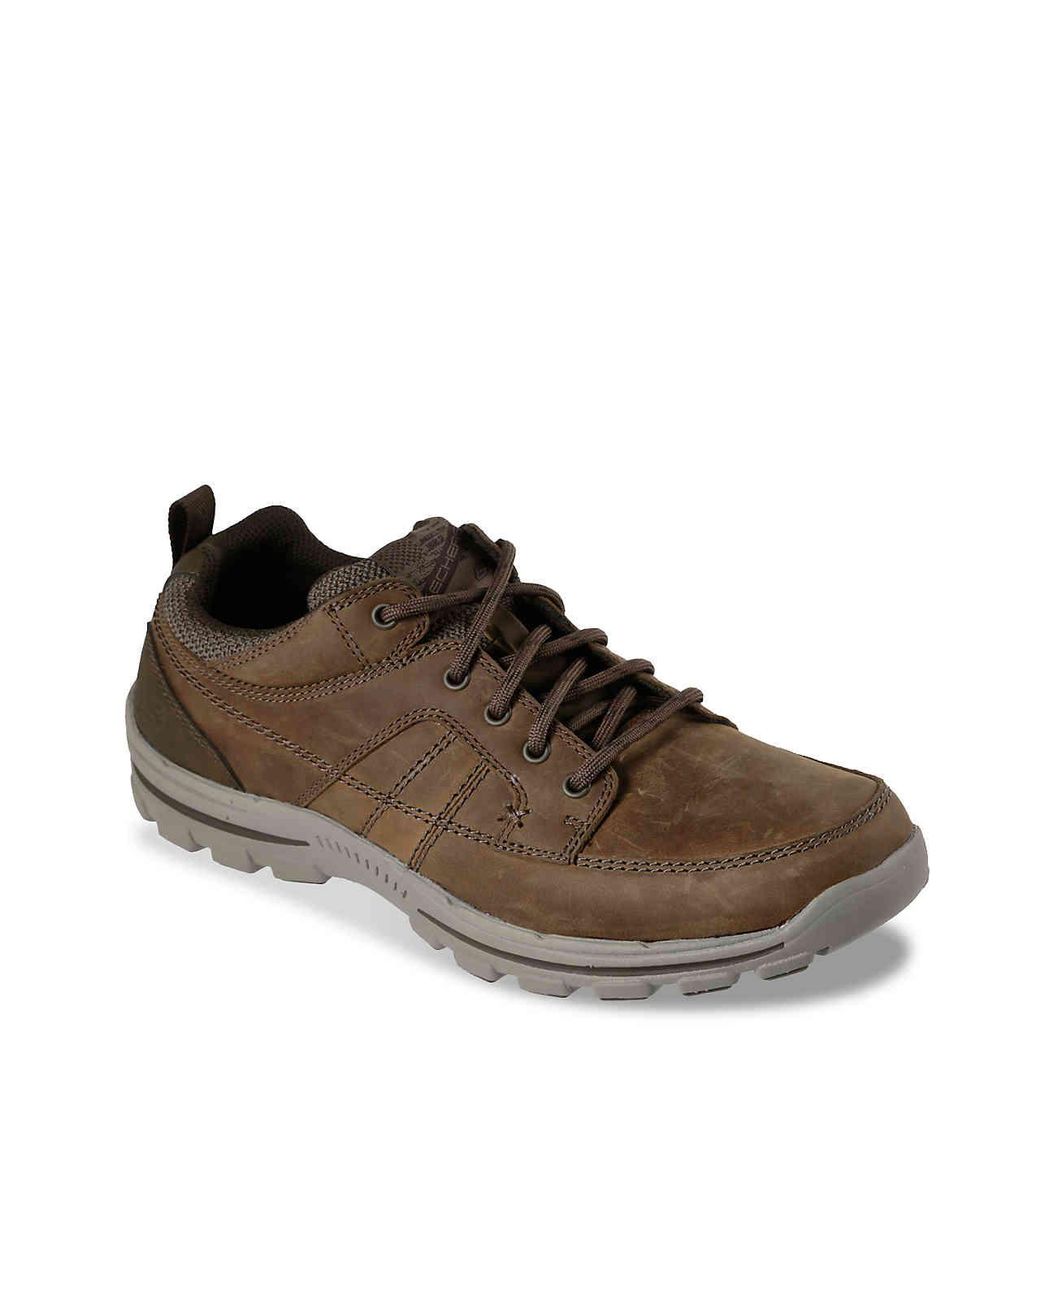 Skechers Men's Brown Relaxed Fit Braver Ralson Oxford